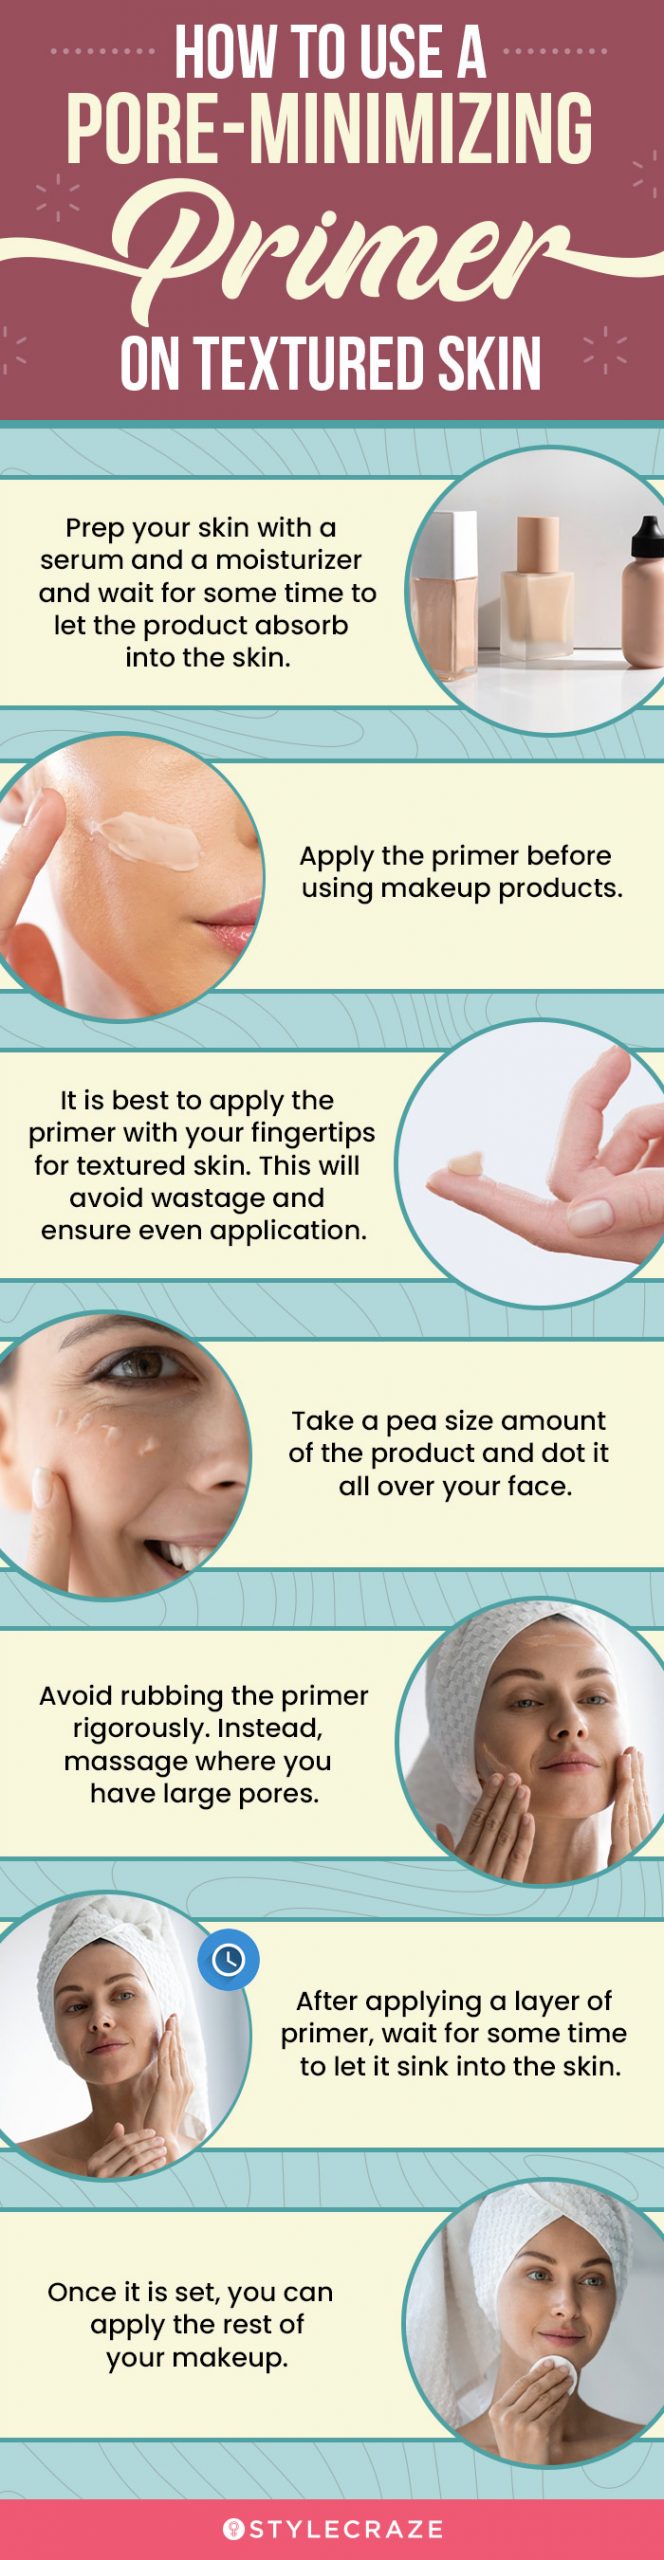 How To Use A Pore Minimizing Primer (infographic)